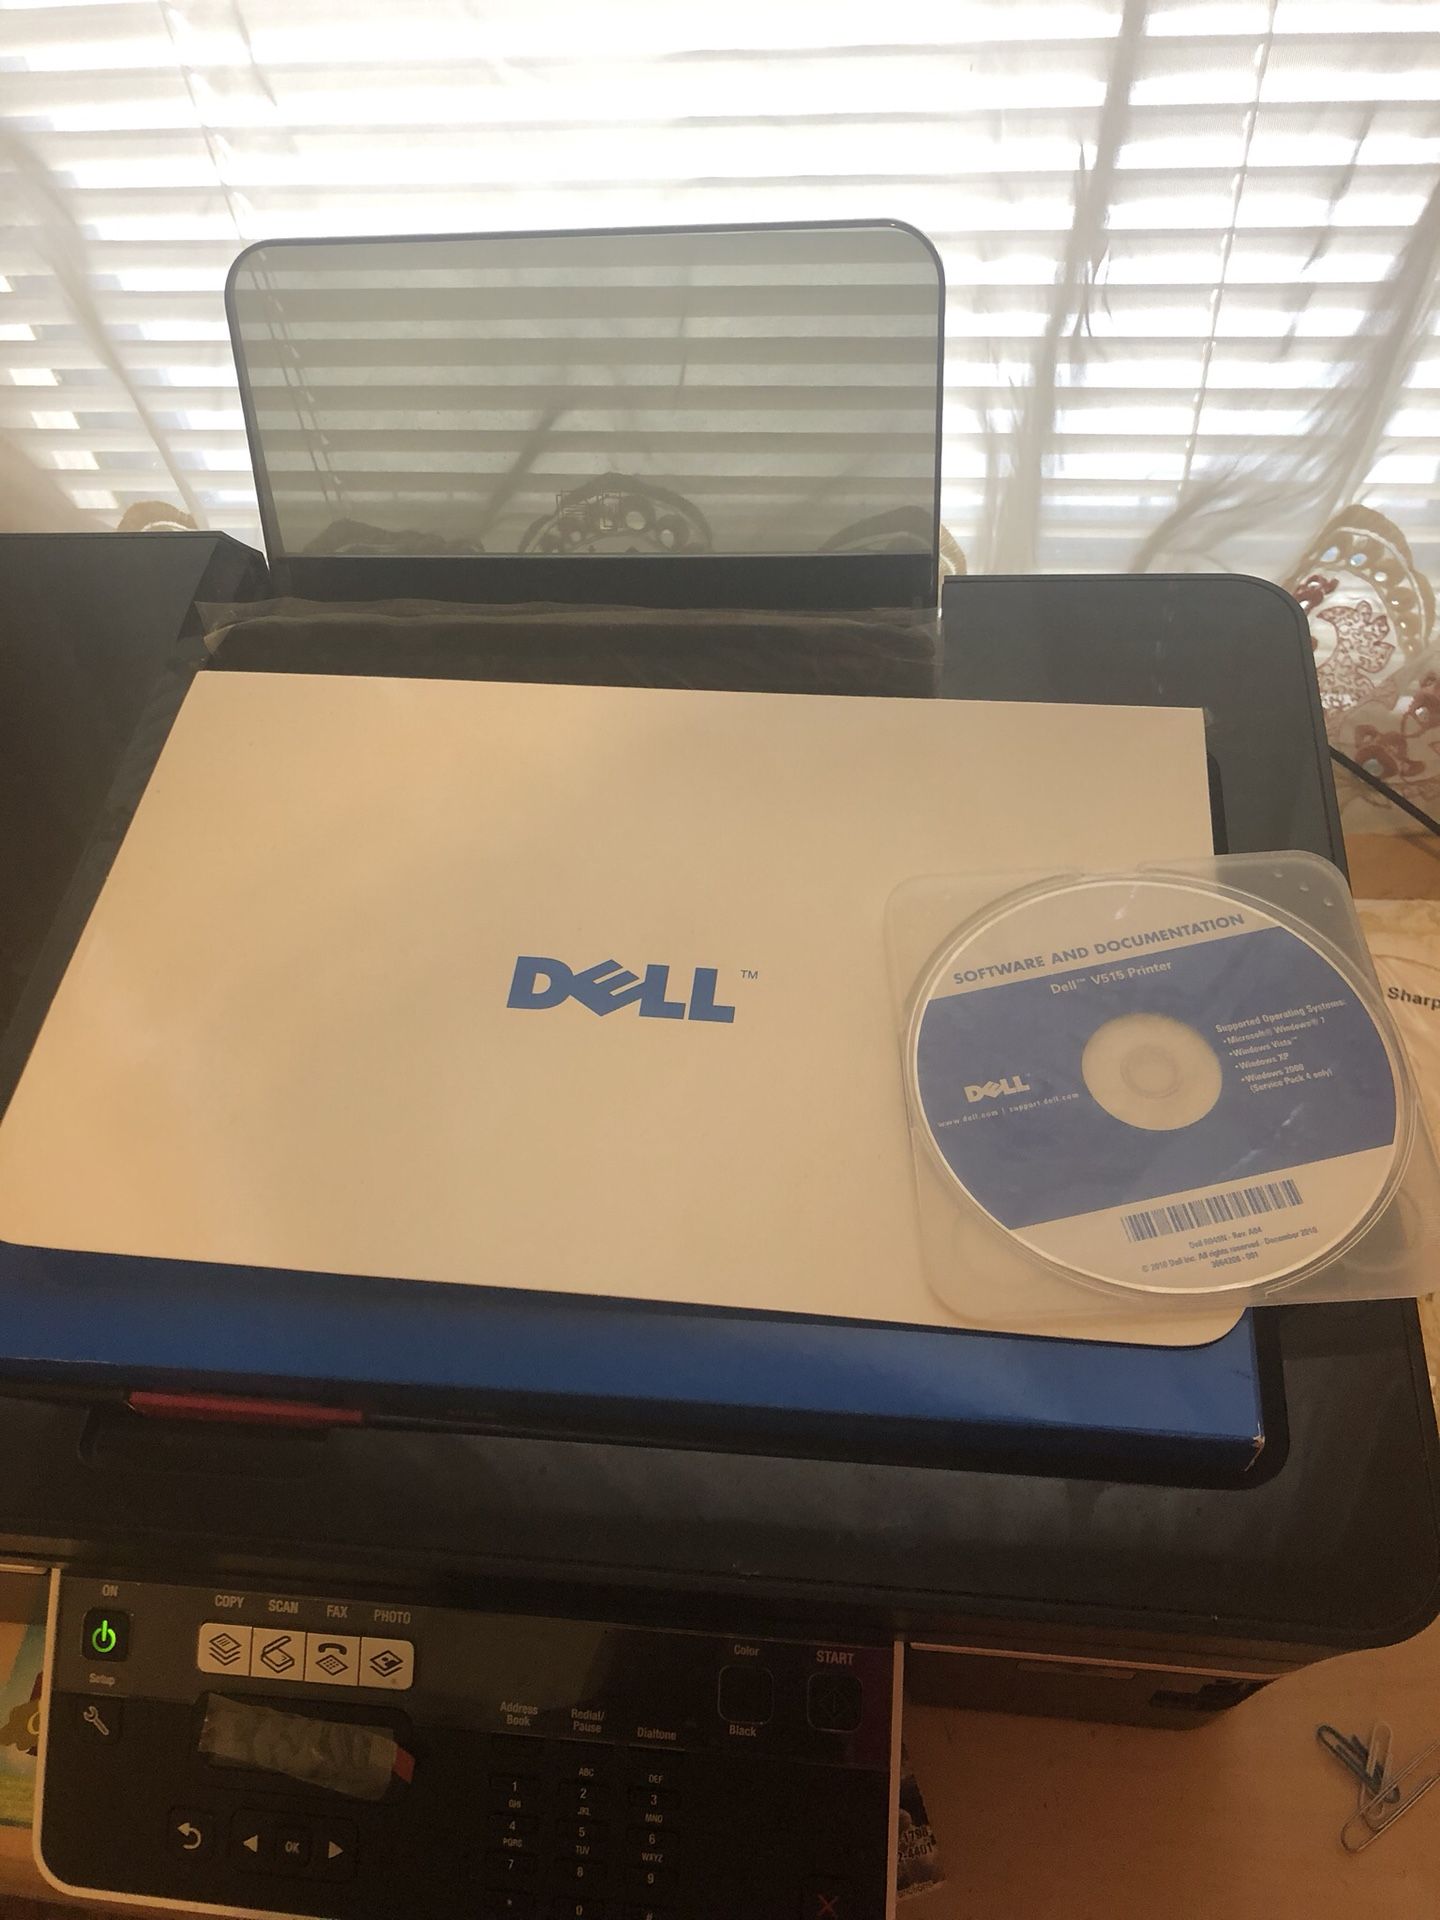 Dell V515W all in one ink jet printer